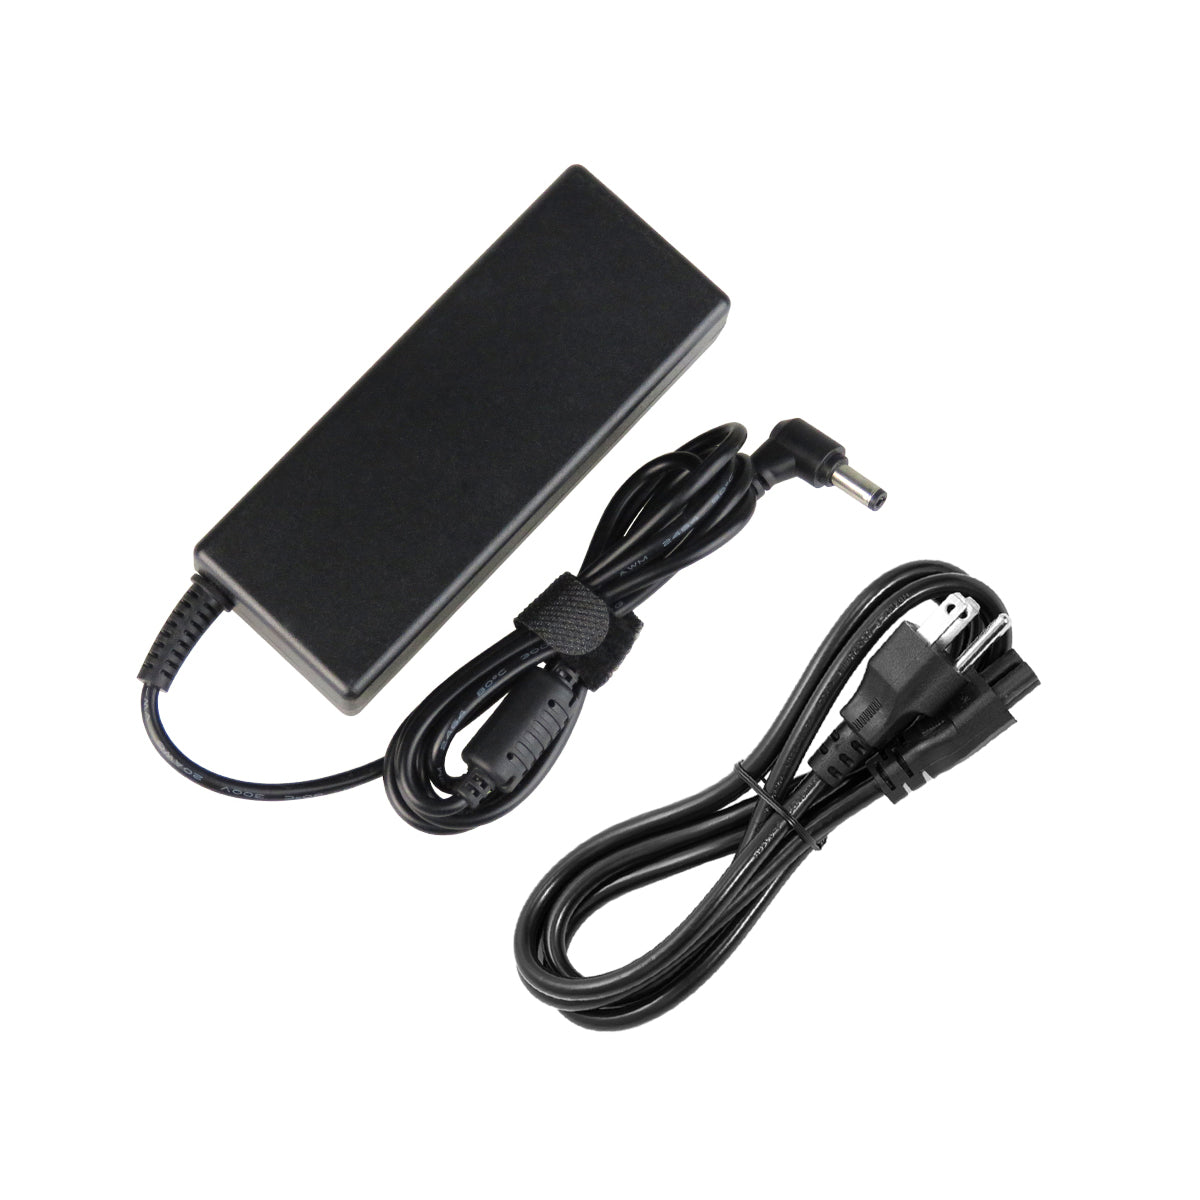 AC Adapter Charger for Gateway S-7220 Notebook.